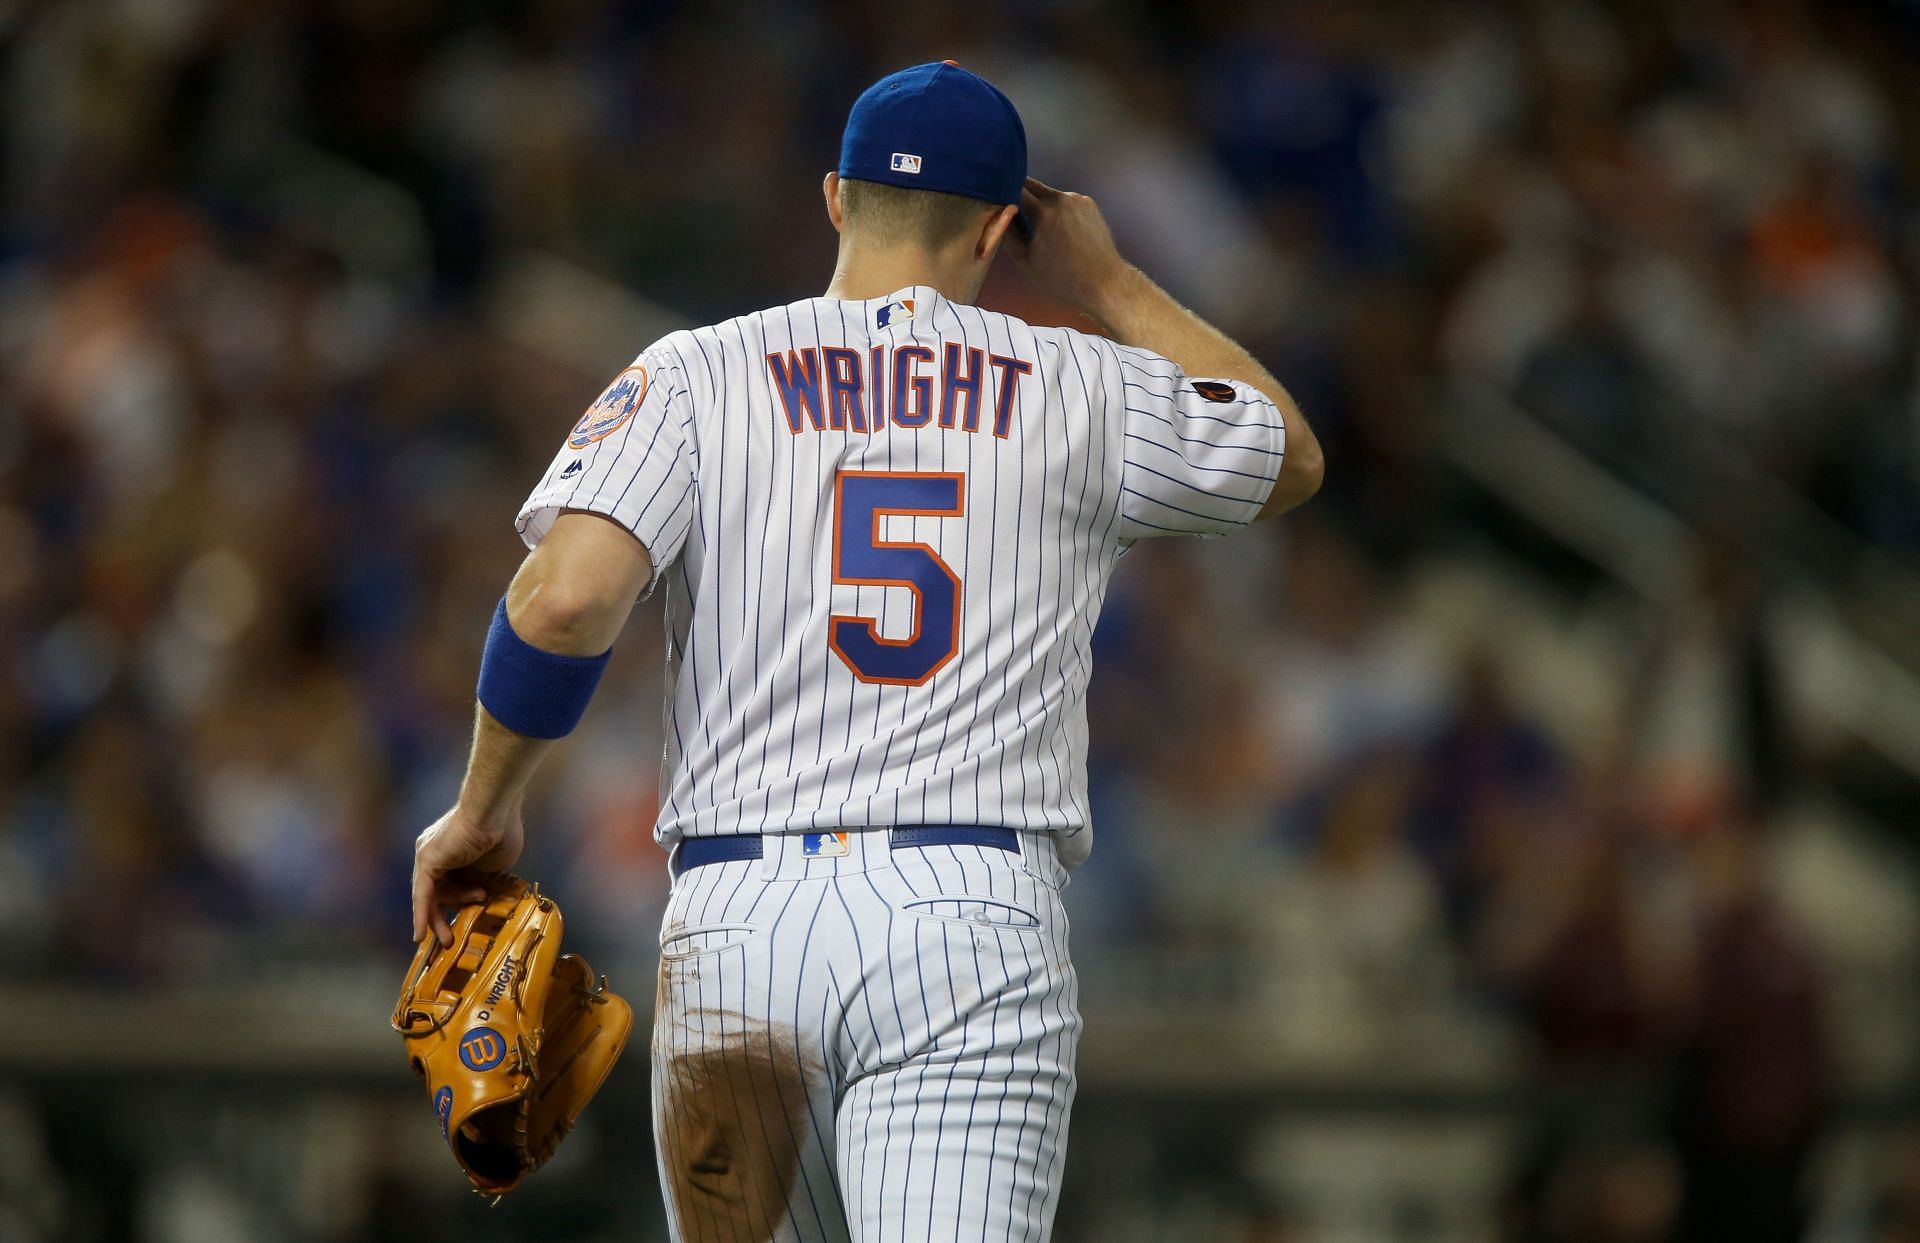 Former New York Mets Captain has high expectations for team in